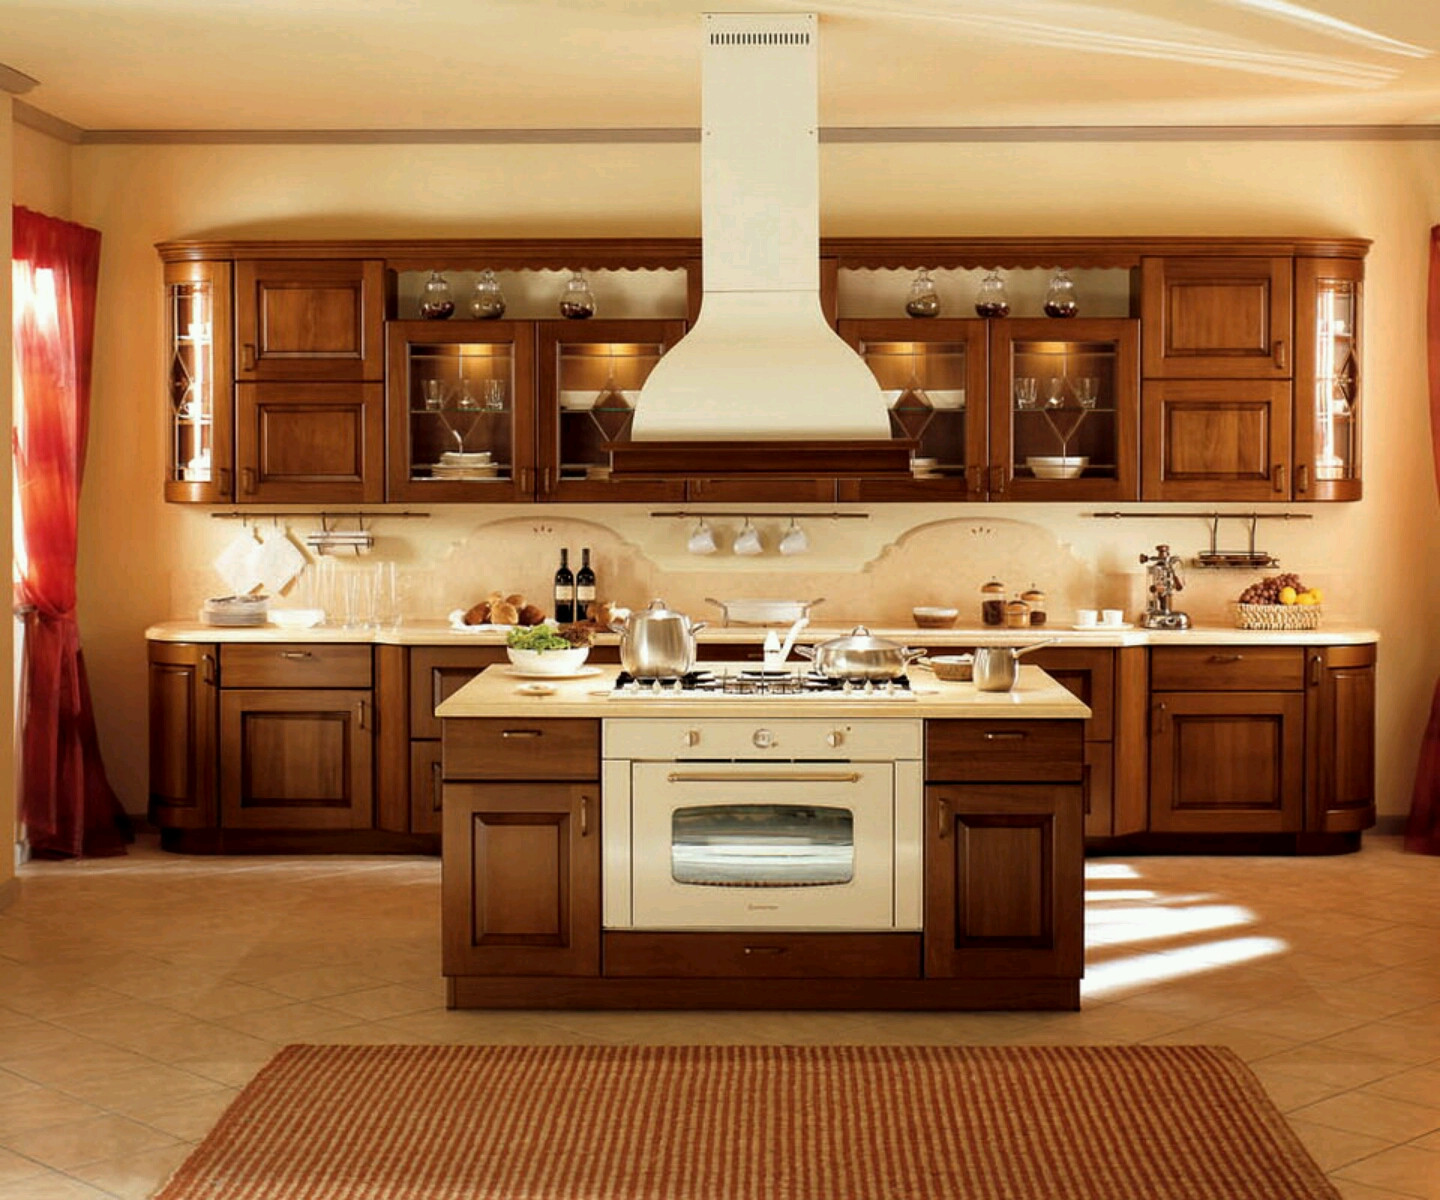 Top Of Kitchen Cabinet Decorations
 New home designs latest Modern kitchen cabinets designs